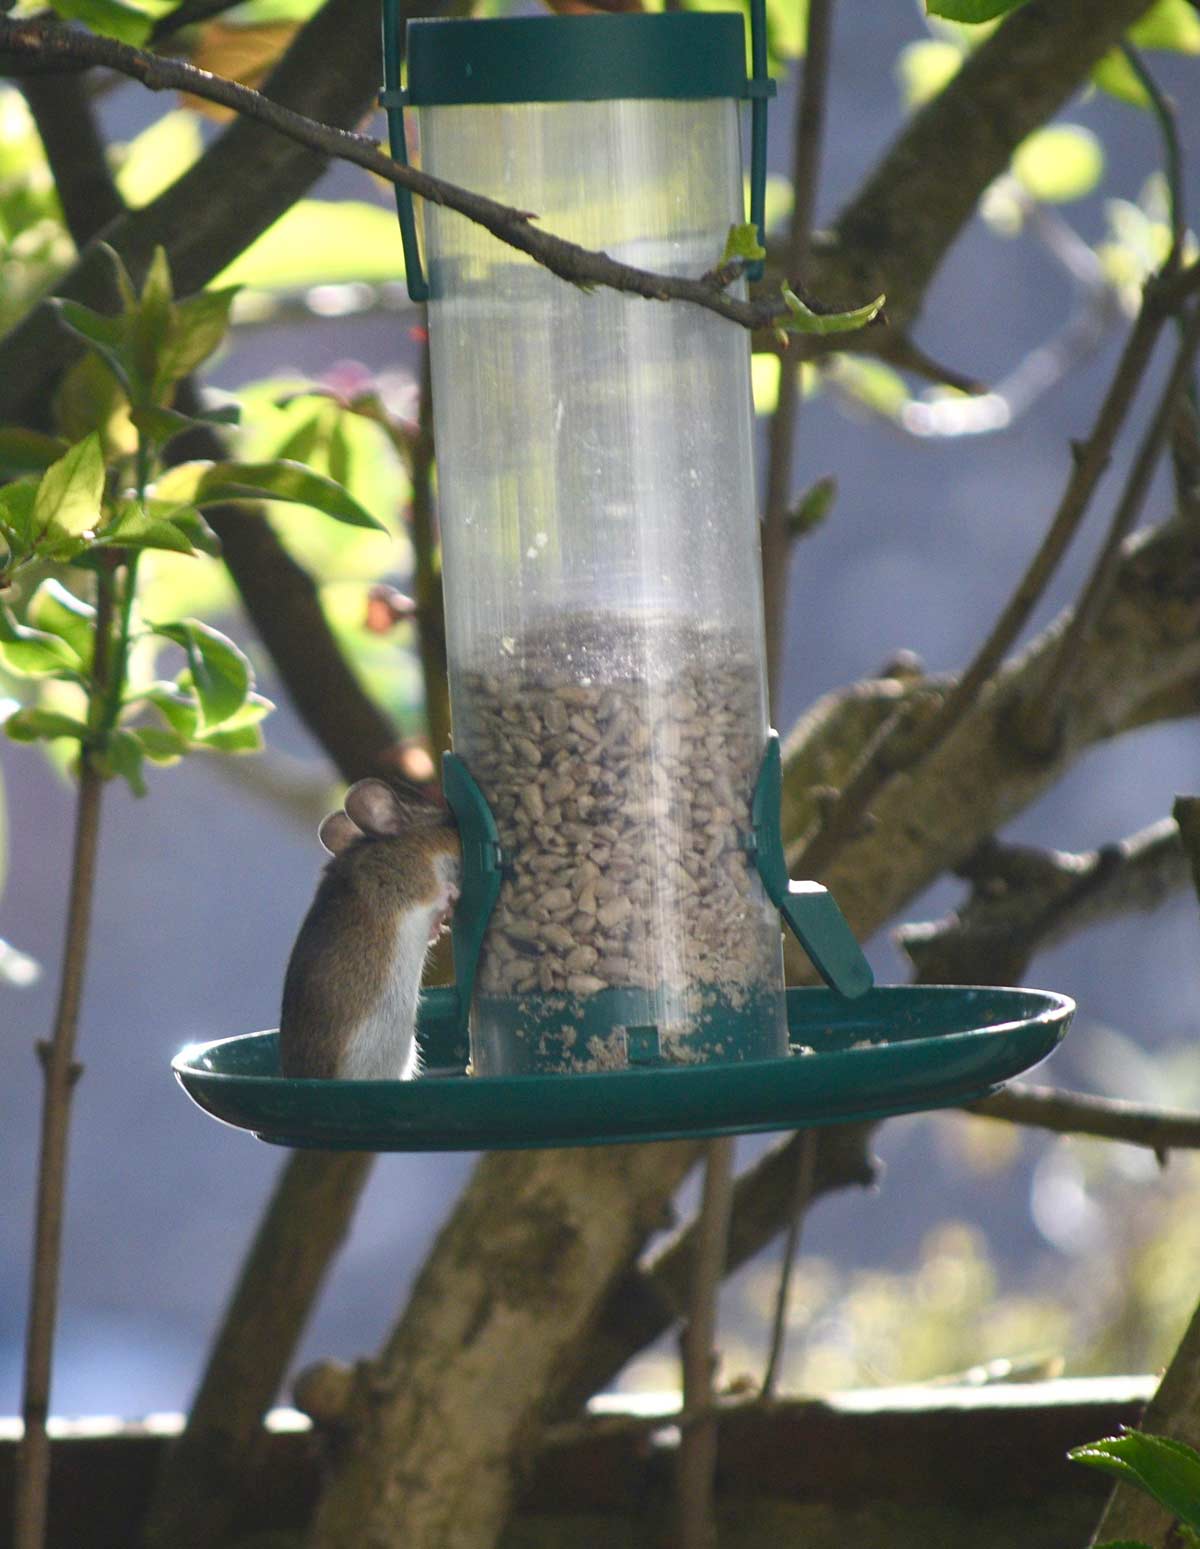 Bought a bird feeder with a tray underneath so there wouldn’t be spilled seed on the ground to attract mice. First day, working great